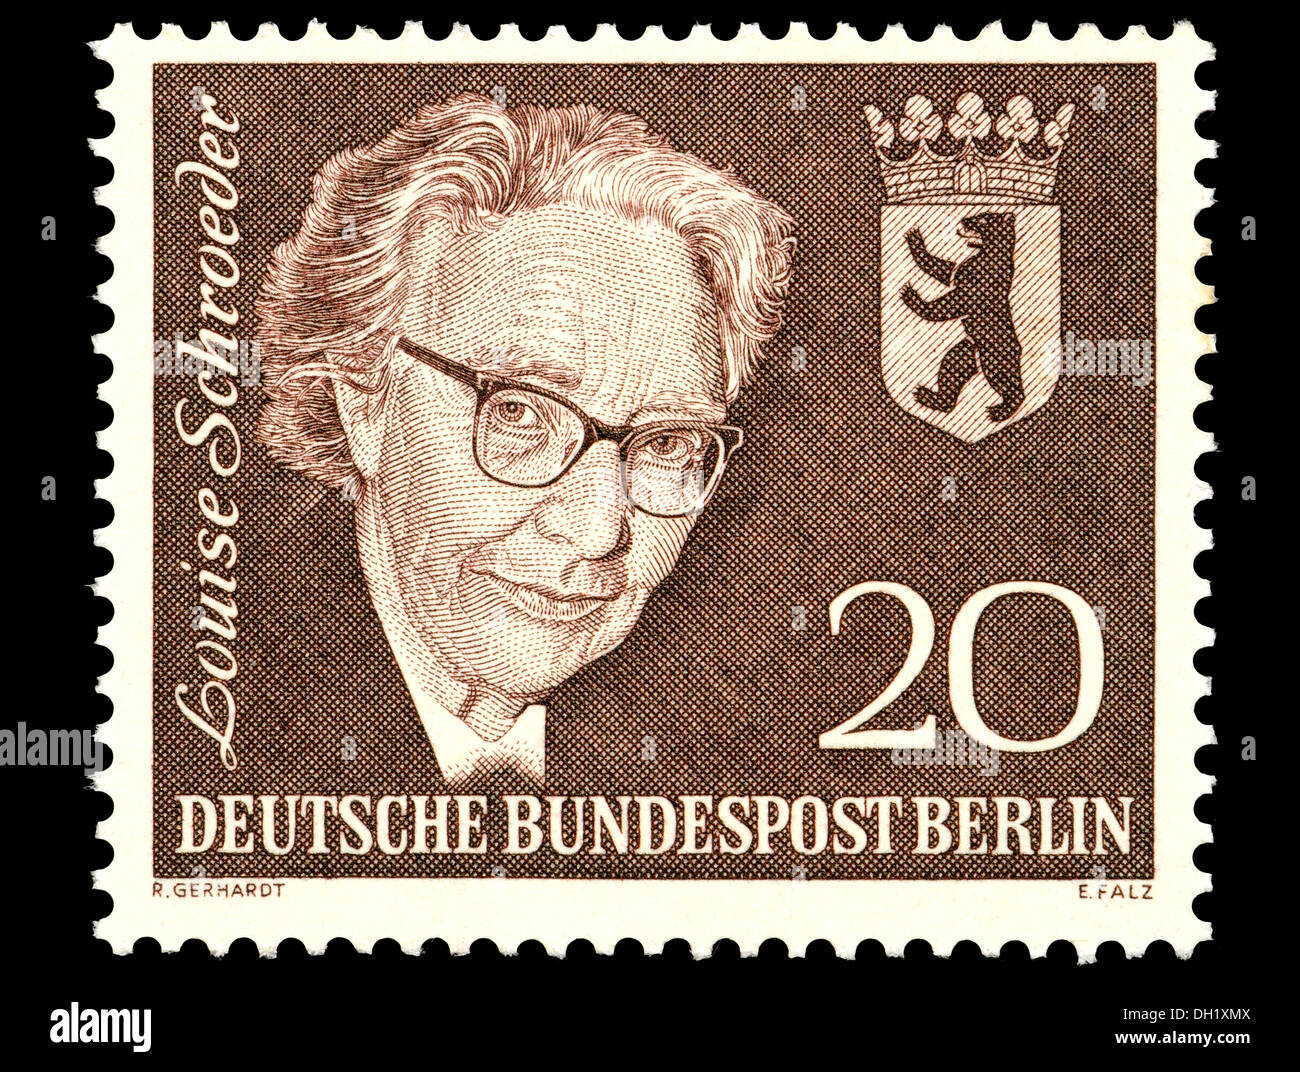 Portrait of Louise Dorothea Schroeder (1887-1957: German politician) from German postage stamp. Stock Photo